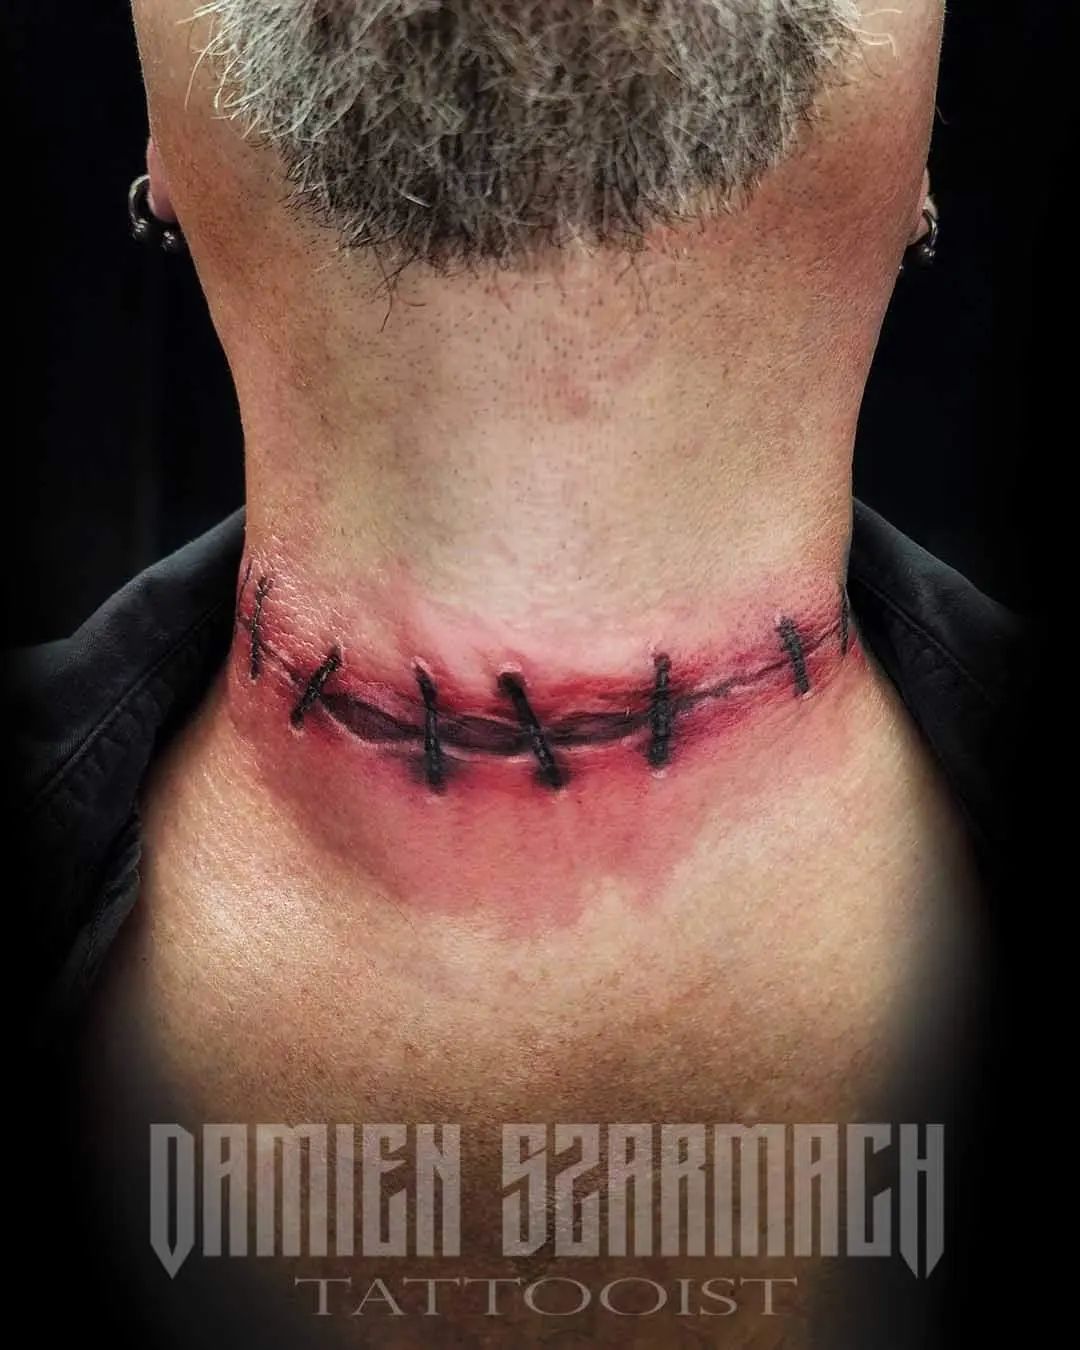 If you're fond of realistic-looking design like this tattoo, you're gonna love this design too. With this tattoo, people will think that you had undergone an operation. So keep it in mind that a tattooist can create this kind of tattoos that look realistic.